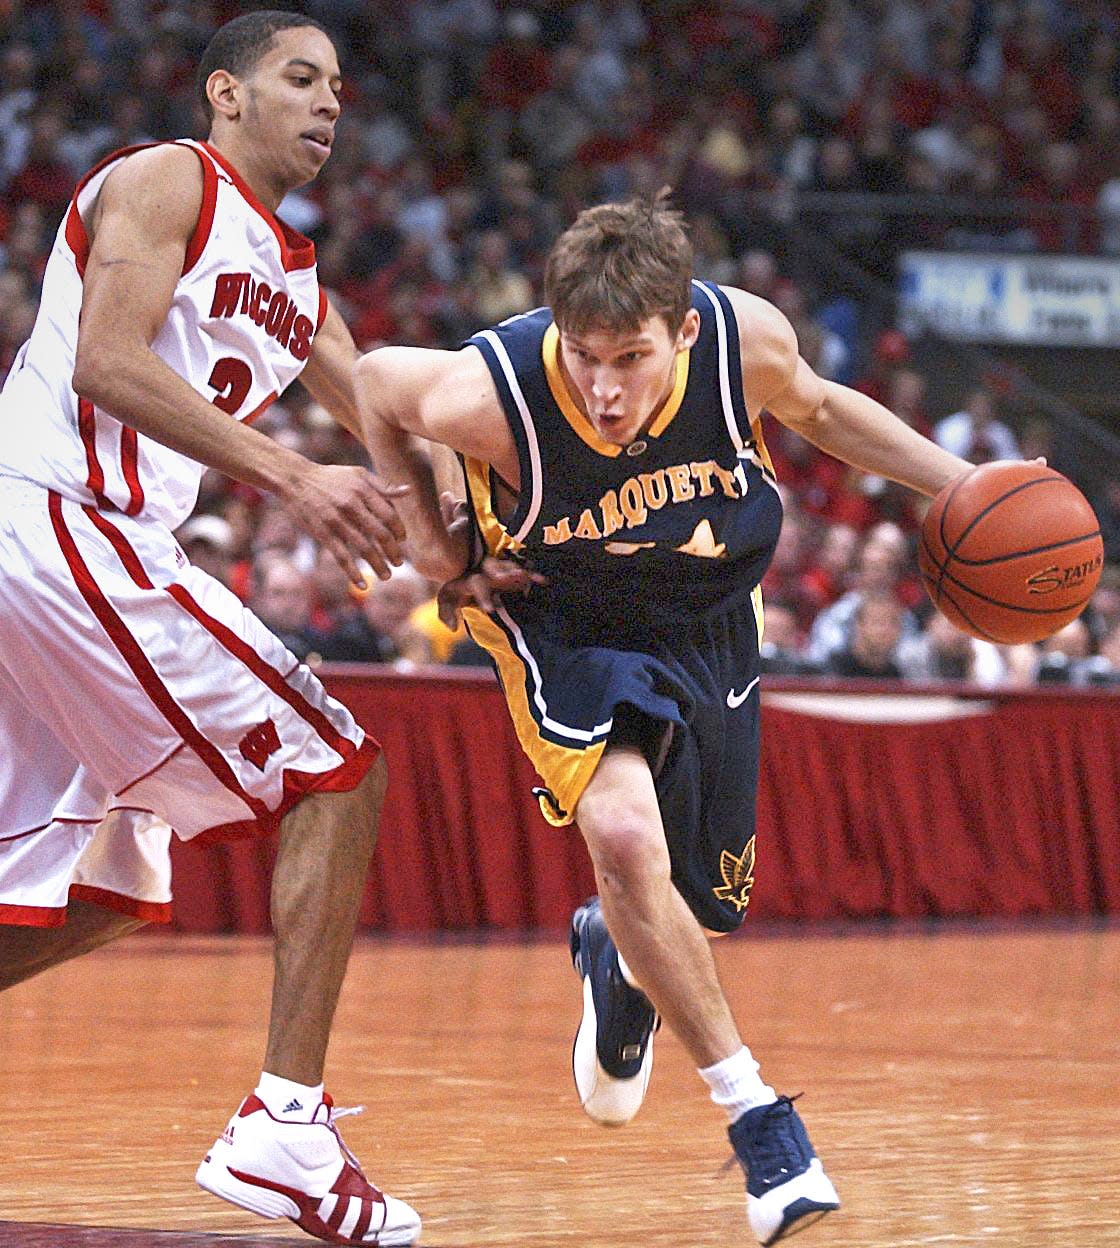 Marquette's Travis Diener drives past Wisconsin's Devin Harris during a game from the Kohl Center in Madison in 2003.